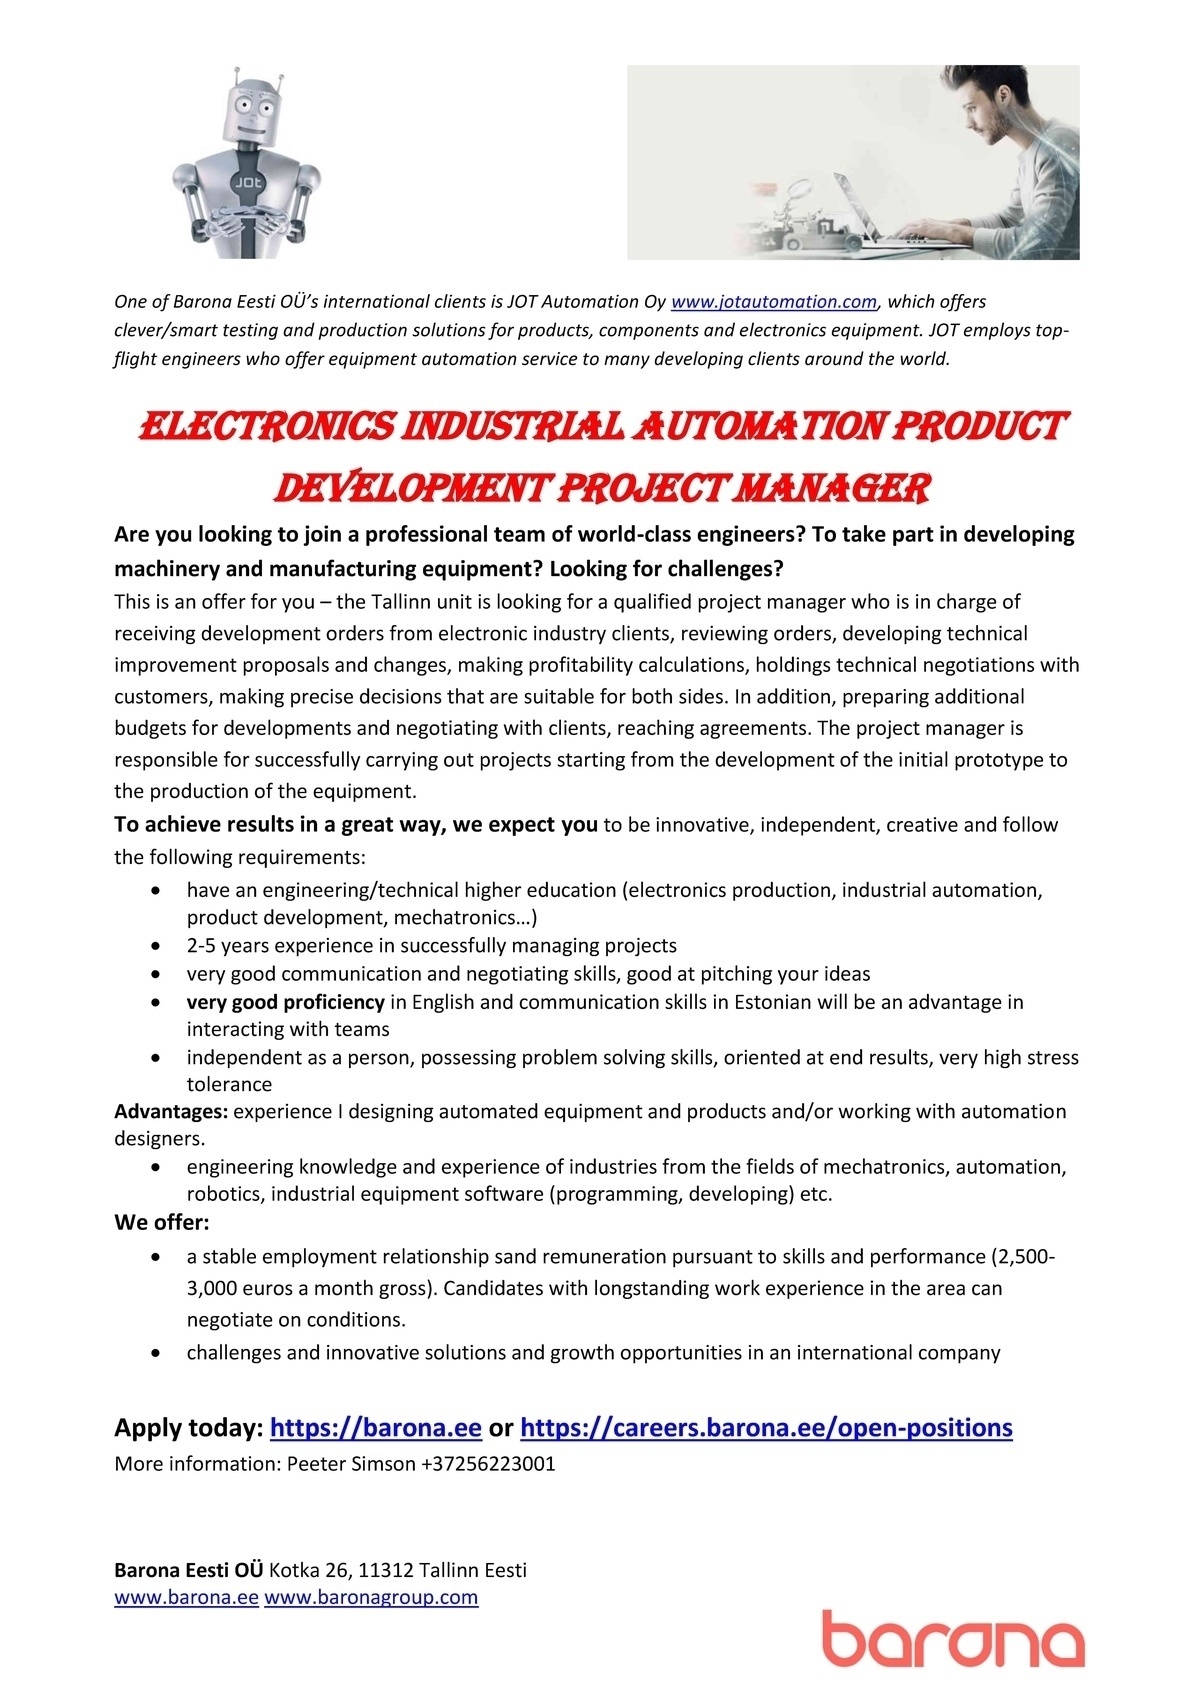 Barona Eesti OÜ Electronics industrial automation PRODUCT DEVELOPMENT PROJECT MANAGER